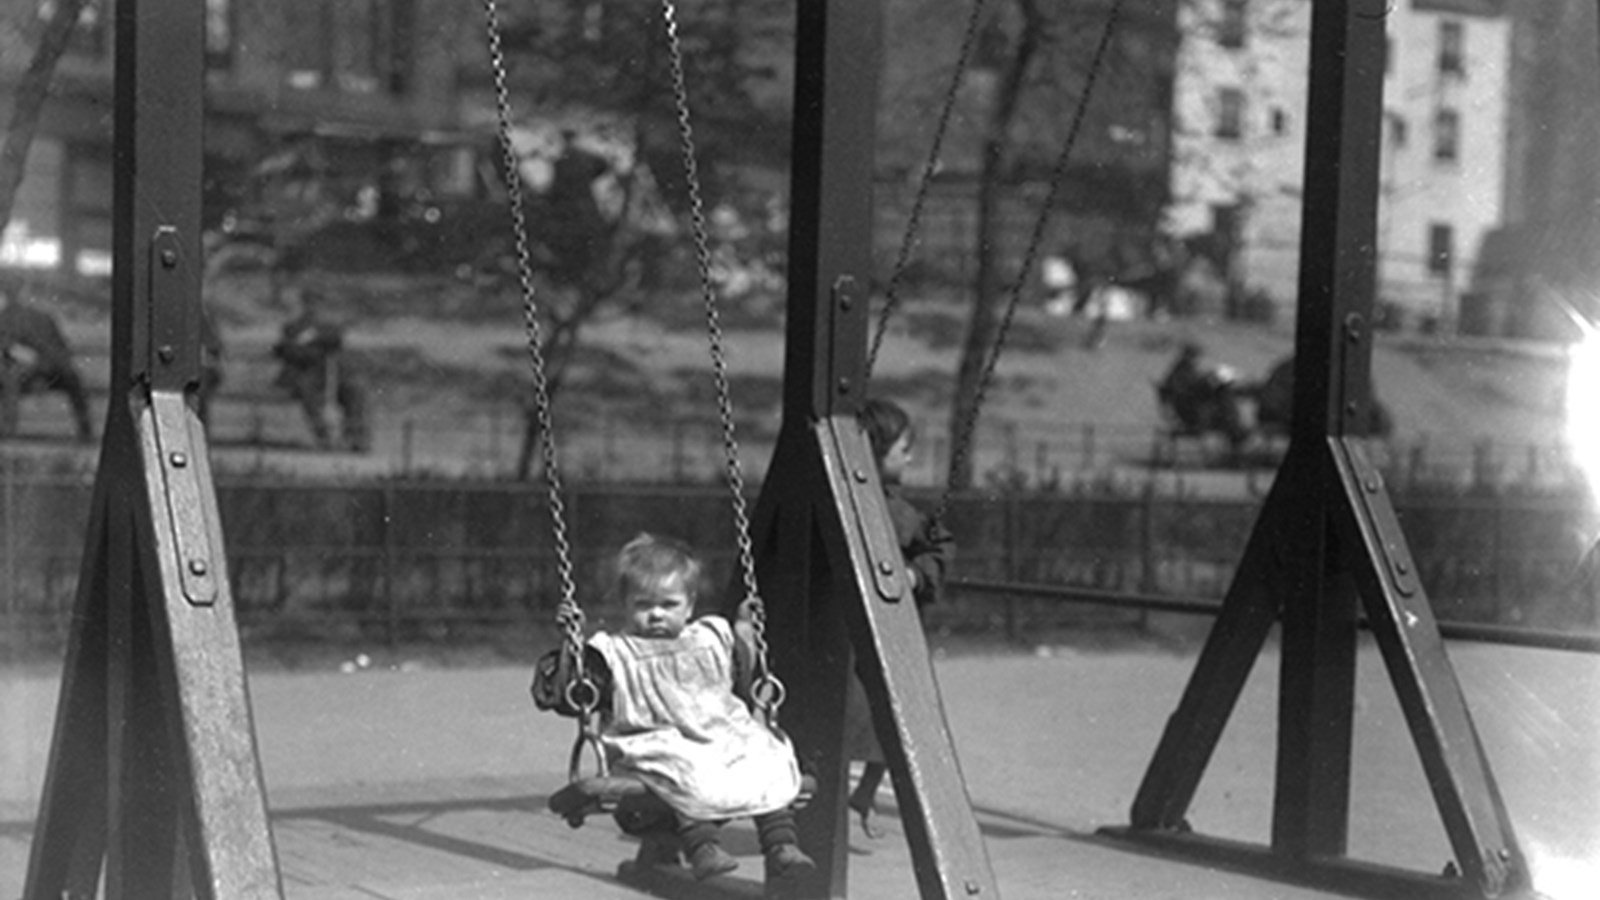 A black and white photograph of a baby on a swing holding onto the swing chain, wearing dirty clothes. There is an older child on the other swing and buildings in the background.